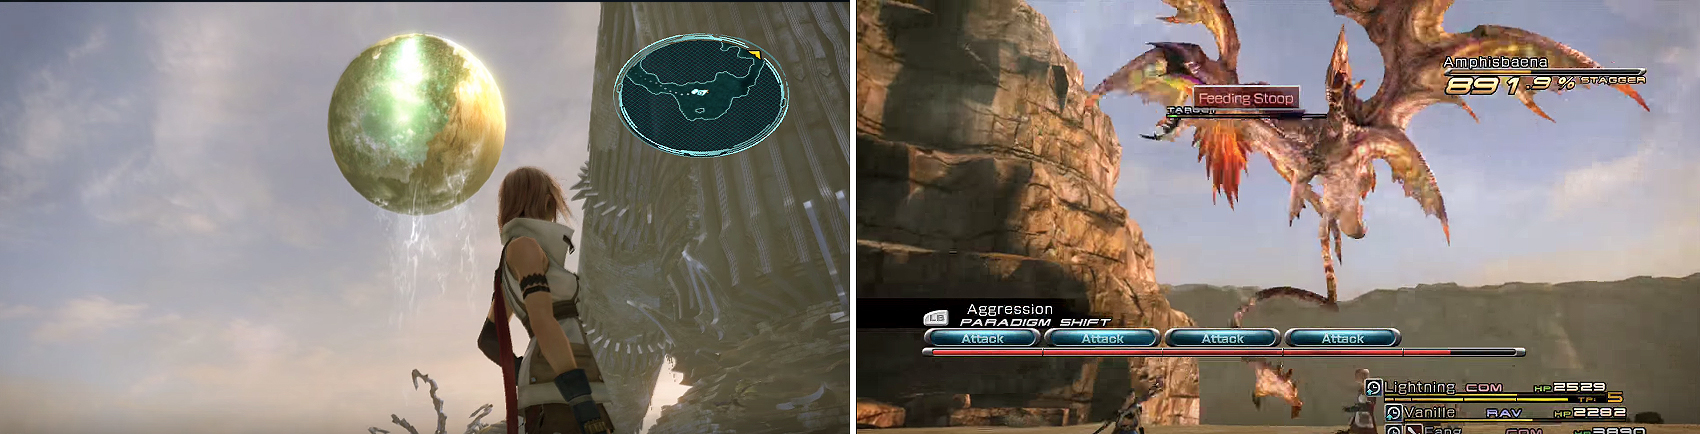 This is one of the best areas in the game to see Cocoon from Gran Pulse (left). Watch out for Feeding Stoop when fighting Amphisbaena (right).